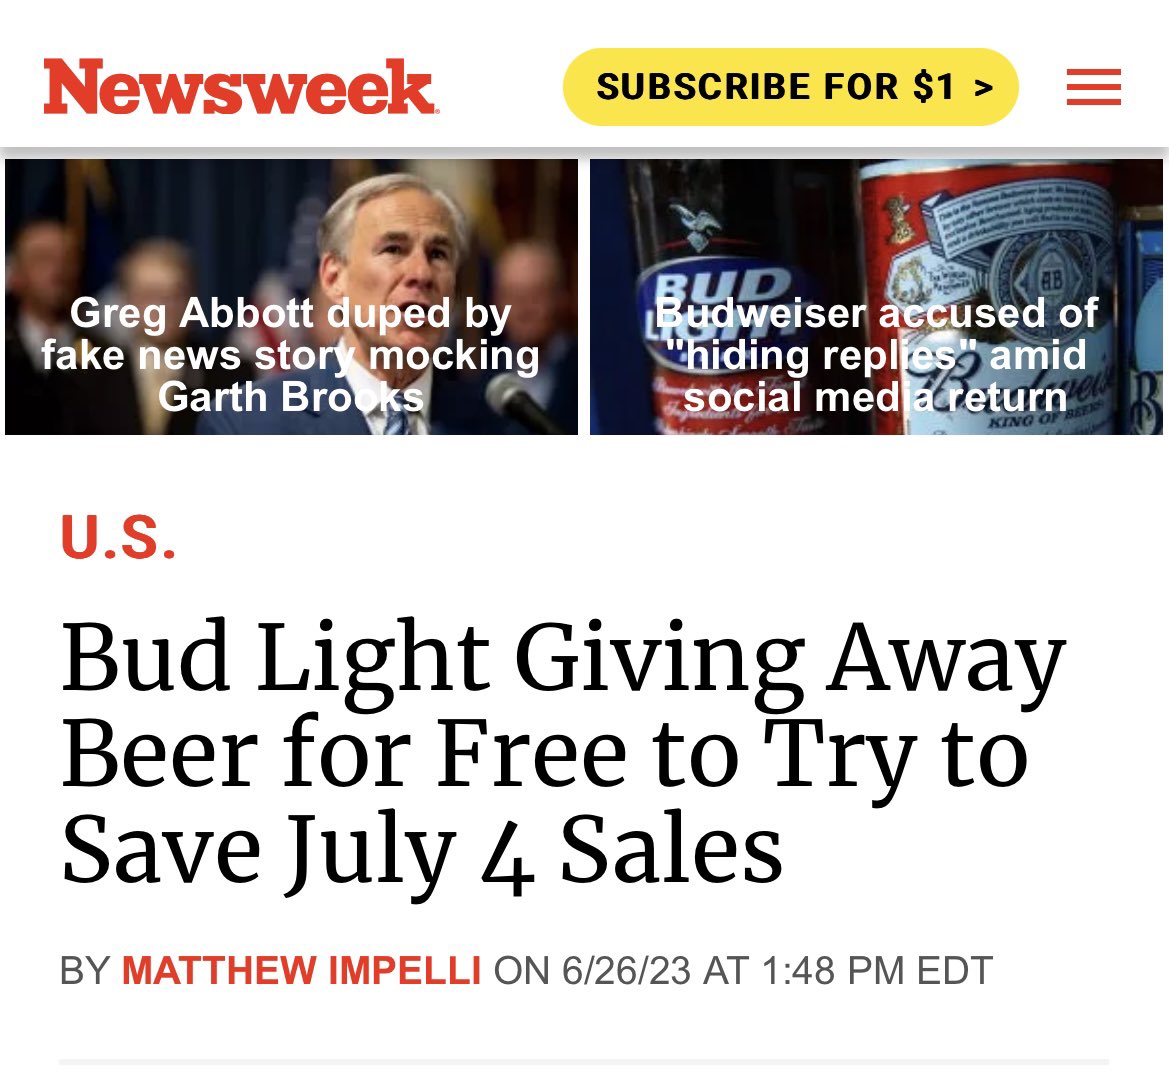 it-guy-on-twitter-on-its-website-bud-light-debuted-a-15-rebate-for